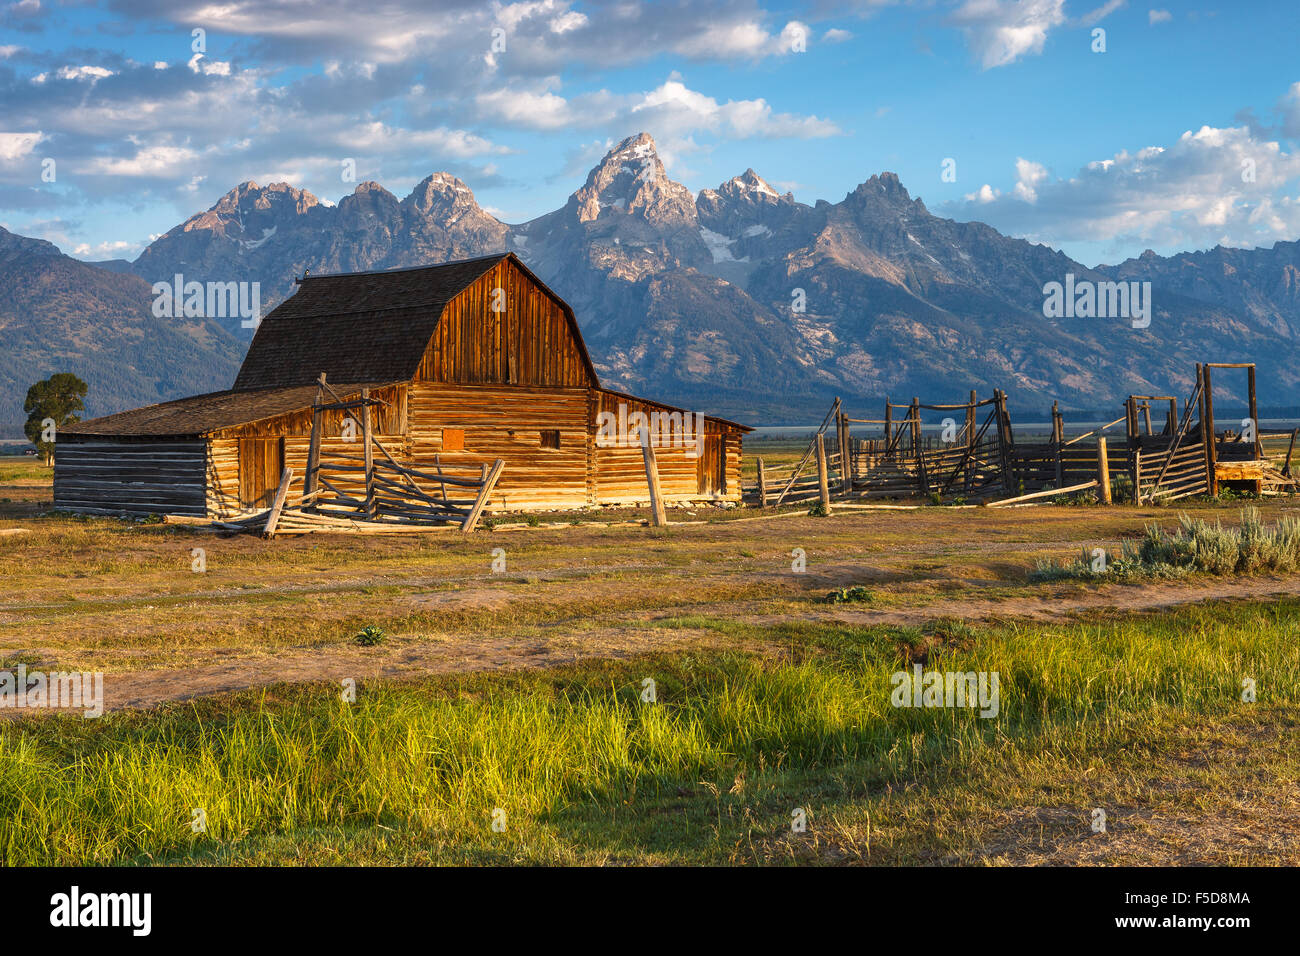 John Moulton Barn at sunrise with the Grand Tetons in the background, Grand Teton National Park, Wyoming, USA. Stock Photo